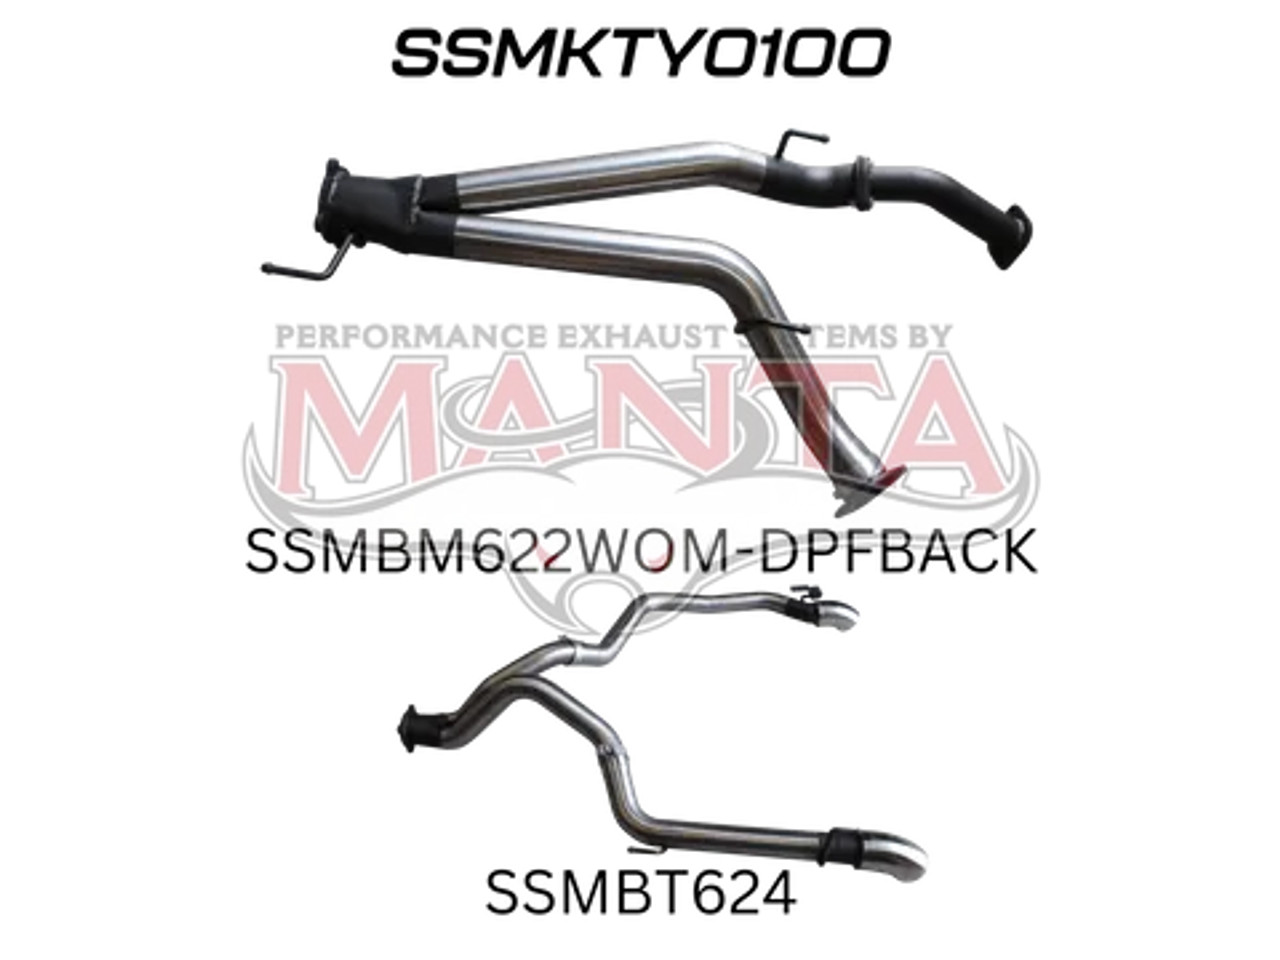 Manta Toyota 200 series Twin 3" Inch DPF Back Tail Pipes | Stainless Steel Exhaust System | Toyota Landcruiser 200 Series